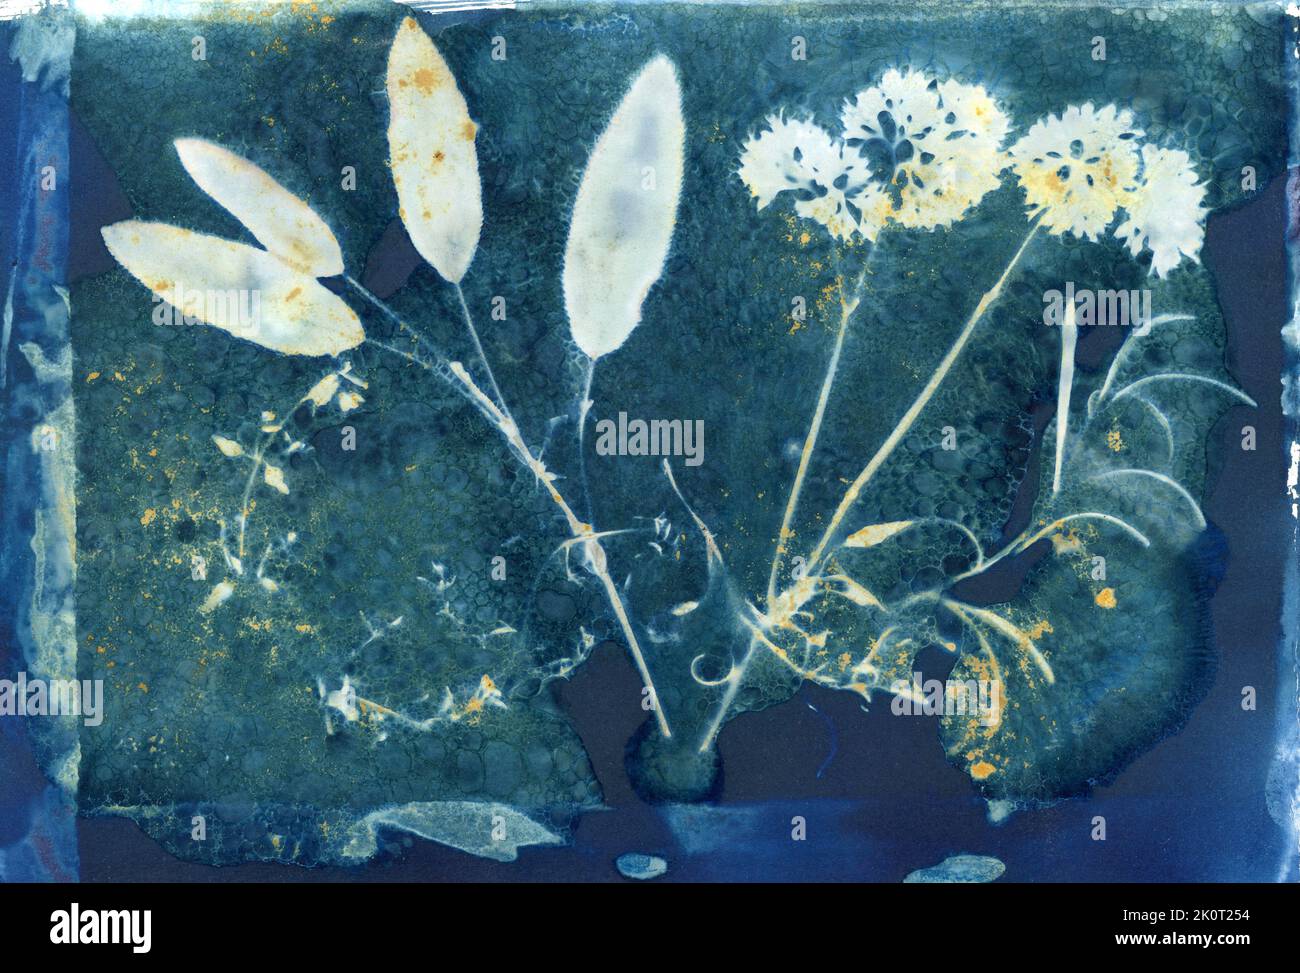 Wet cyanotype print, parsley sage rosemary and thyme, herb contact print, alternative photography process Stock Photo